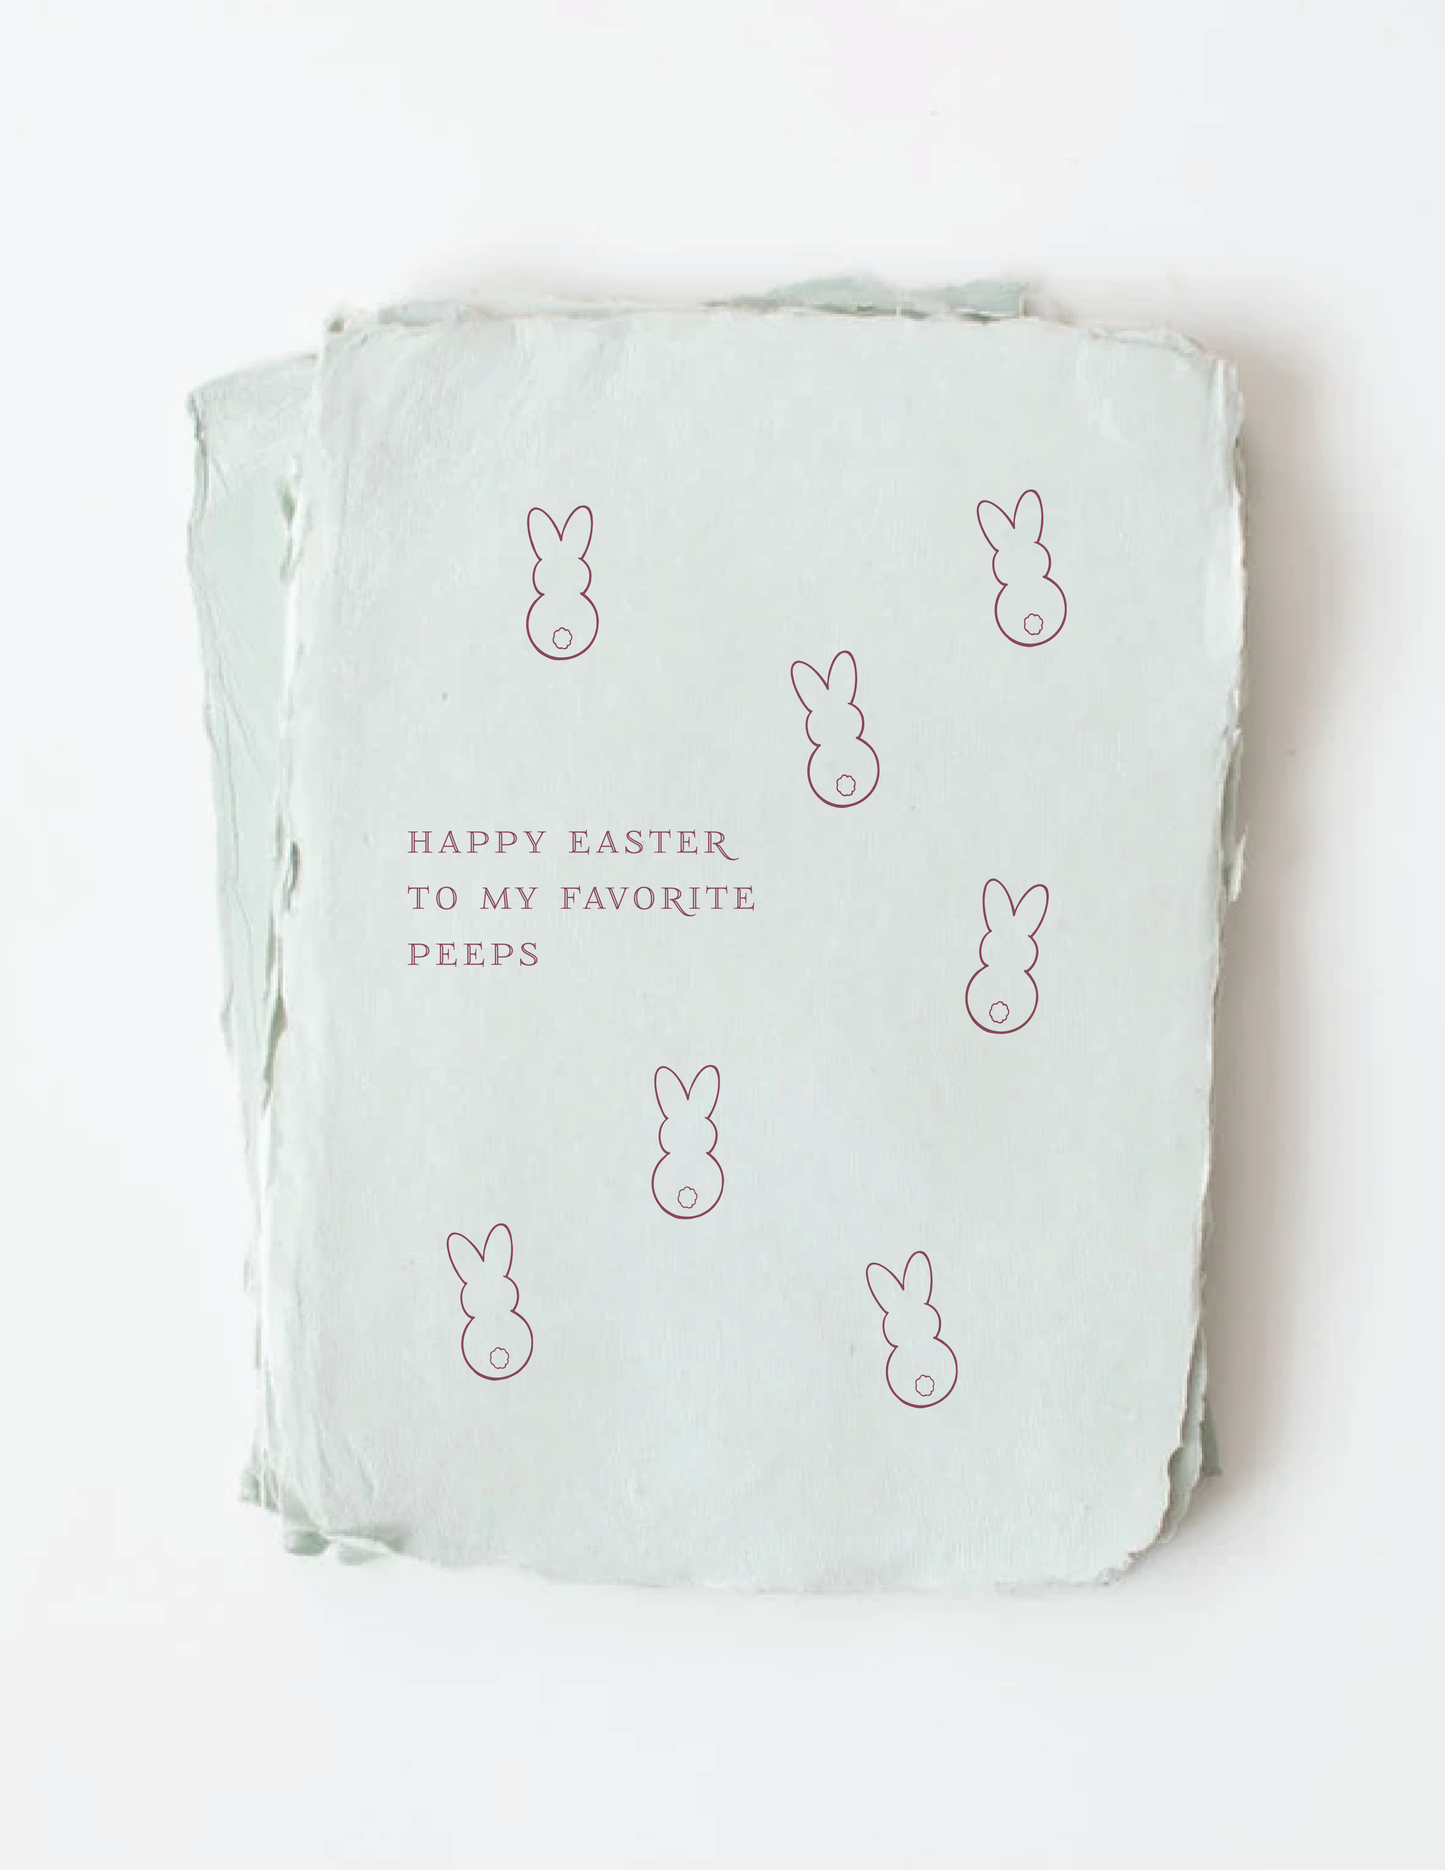 Paper Baristas - "Happy Easter to my favorite Peeps" Greeting Card